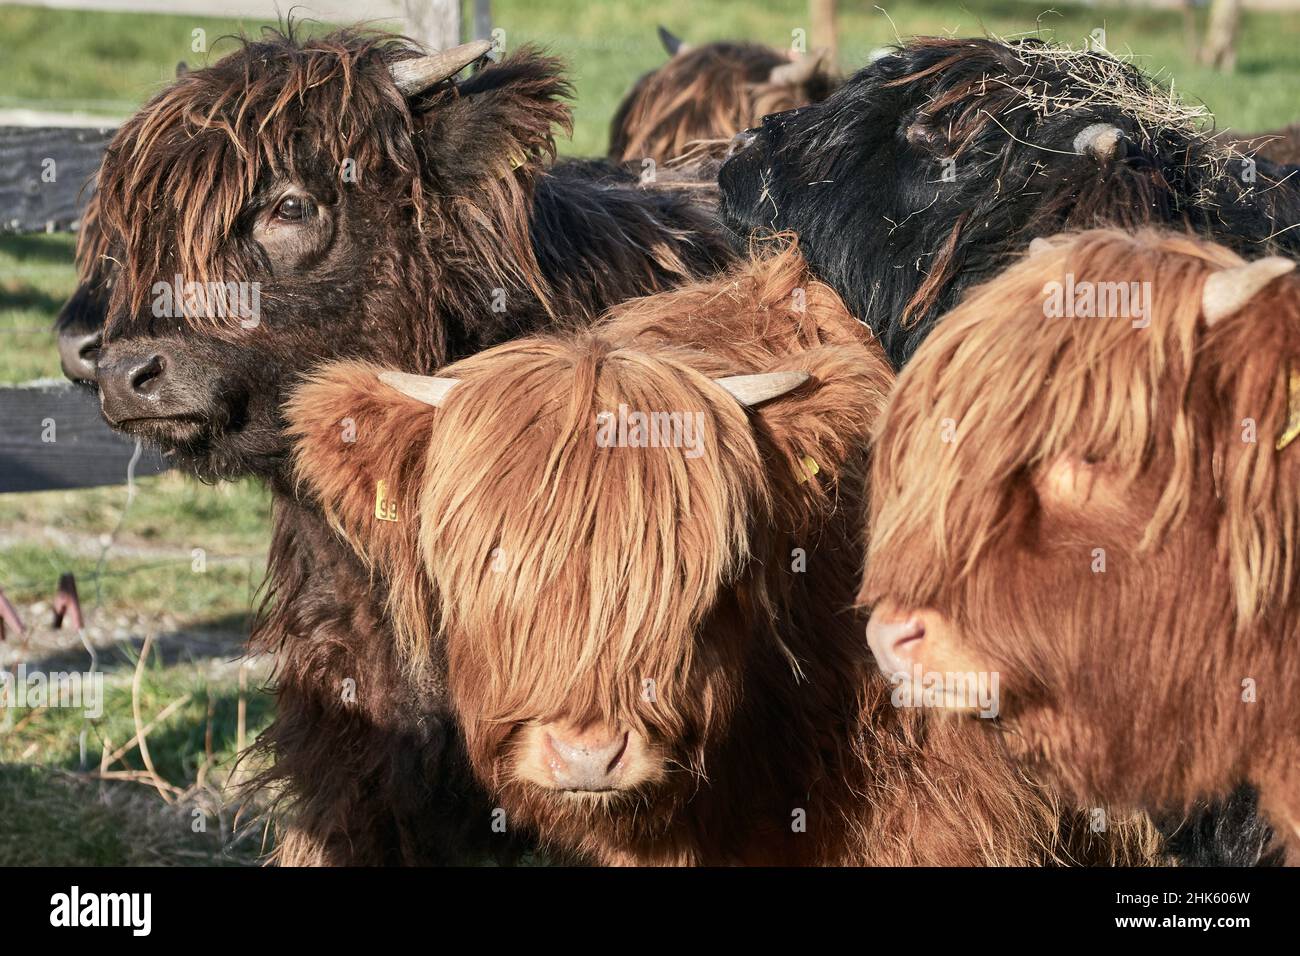 Group of young Highland cattle (Bos taurus) cow calves close together on the farm Stock Photo